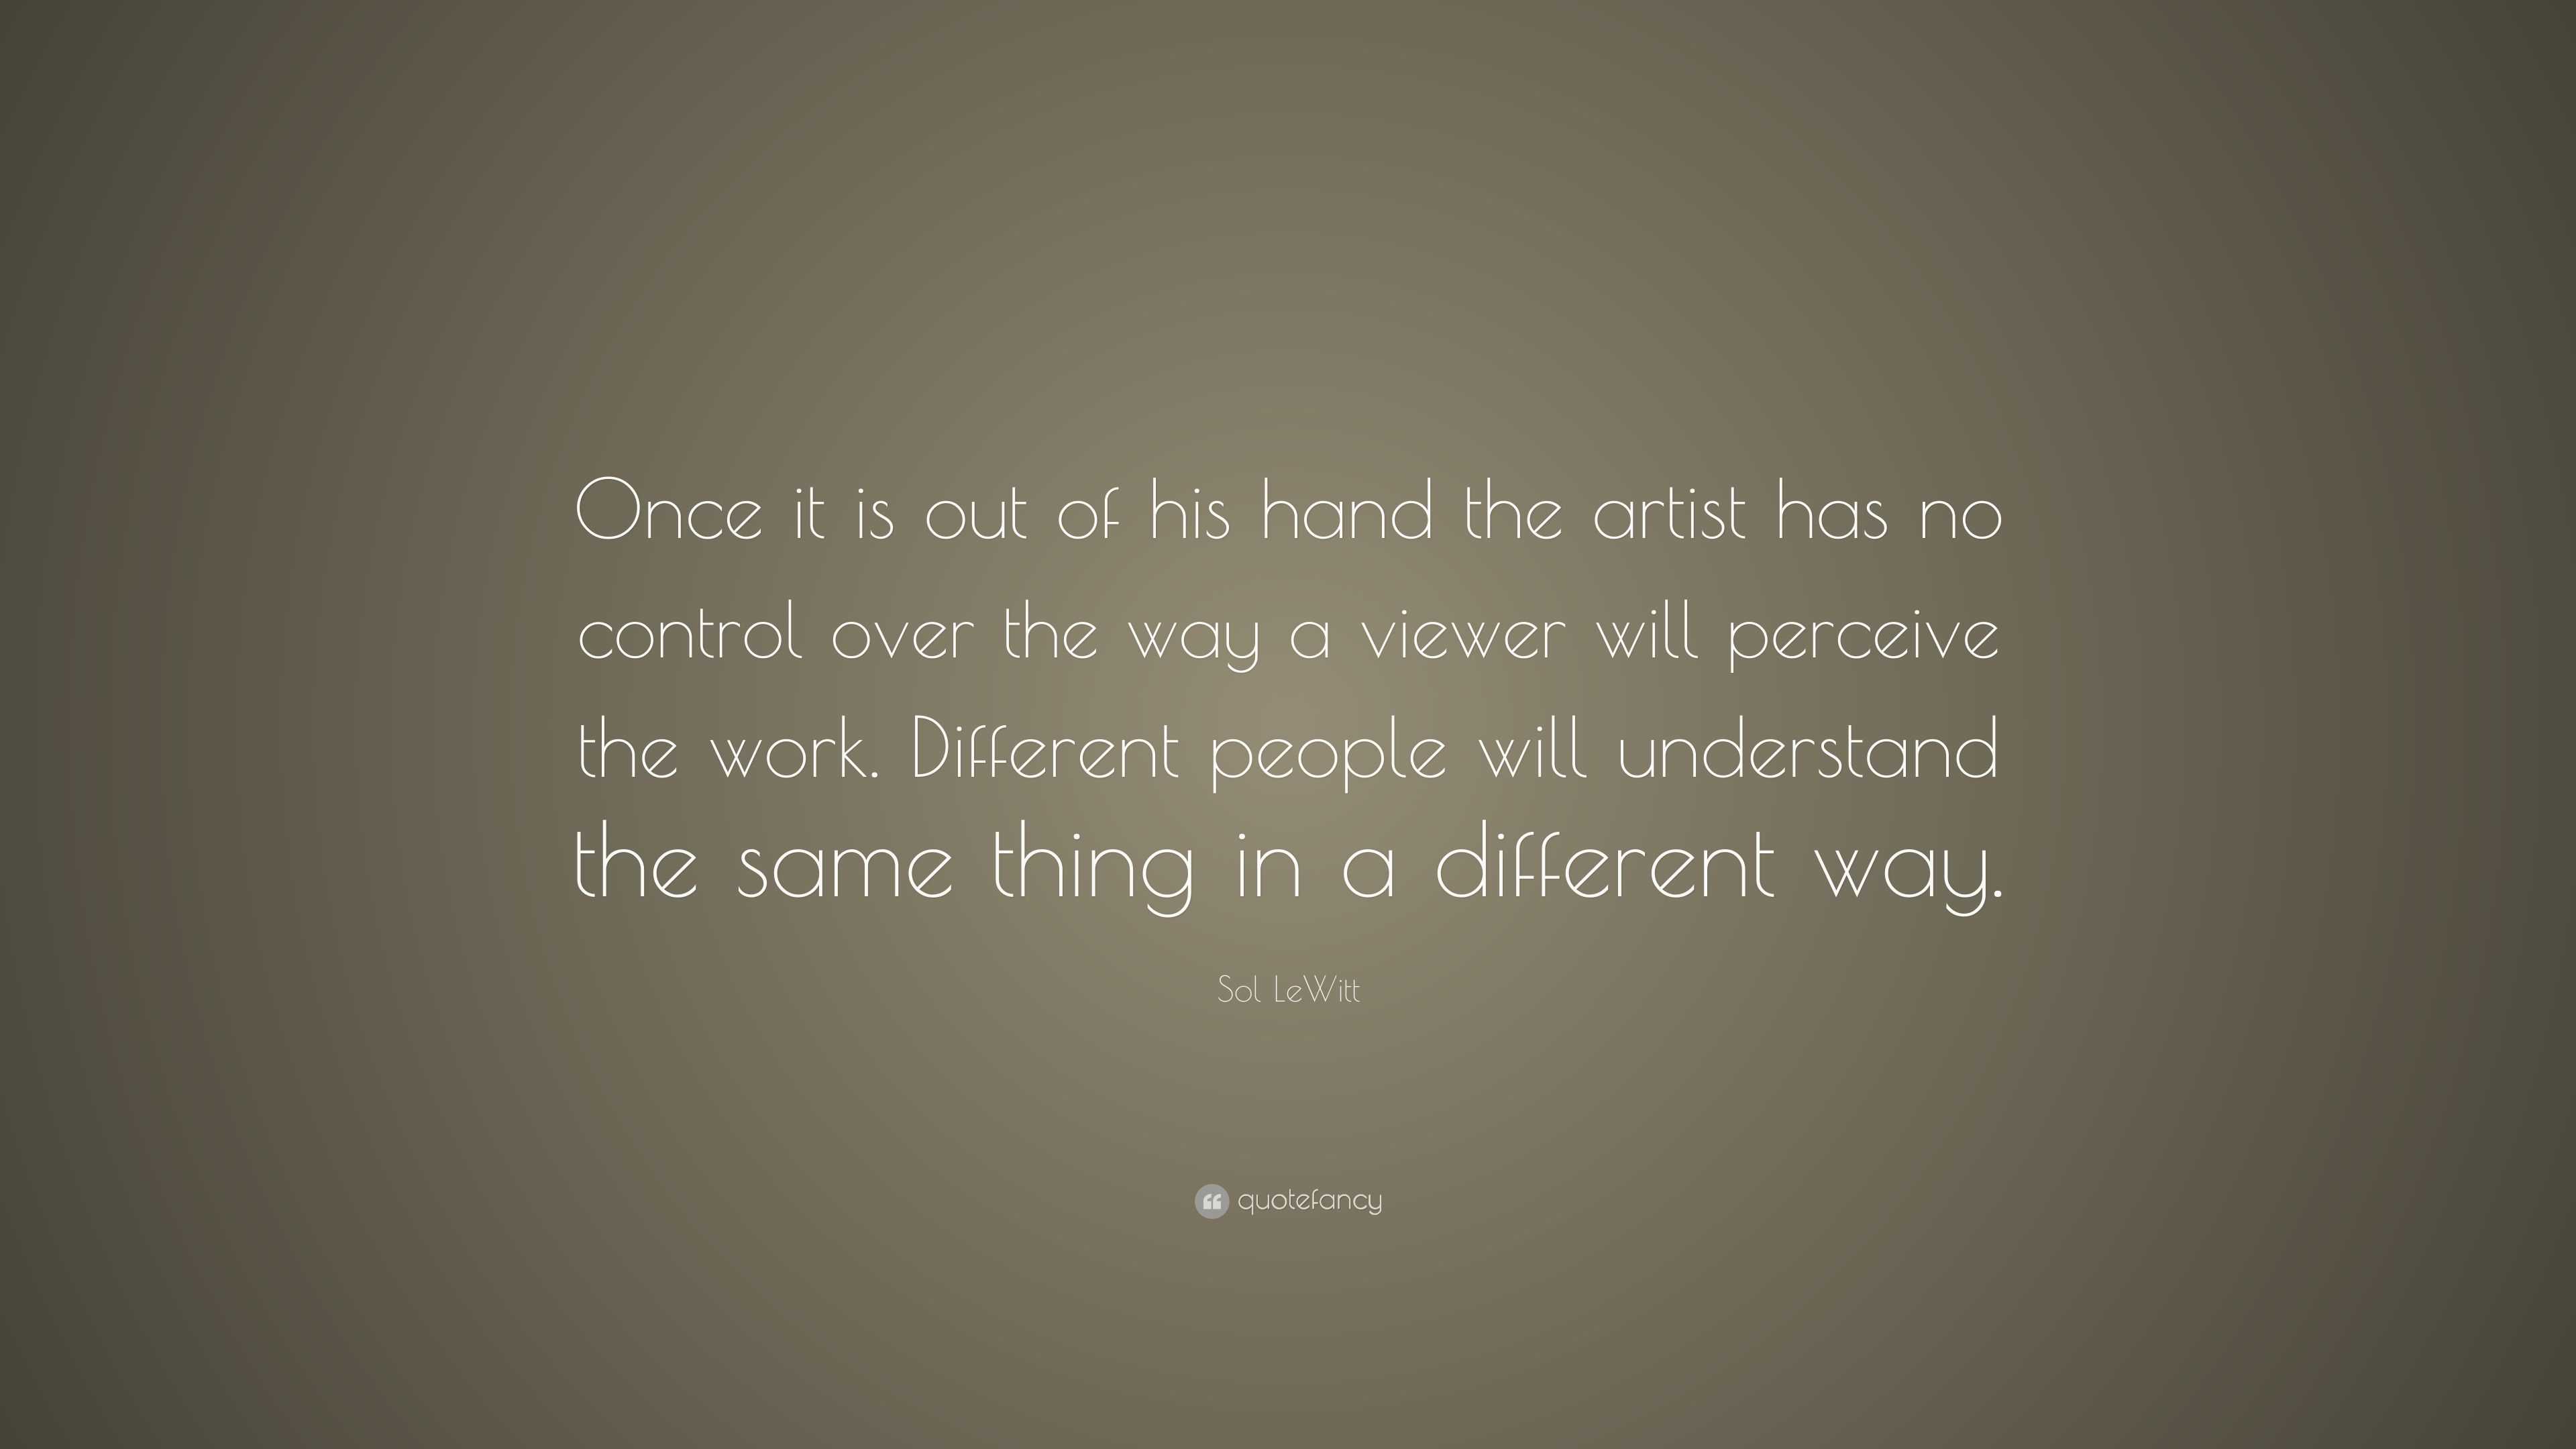 Sol LeWitt Quote: "Once it is out of his hand the artist has no control over the way a viewer ...